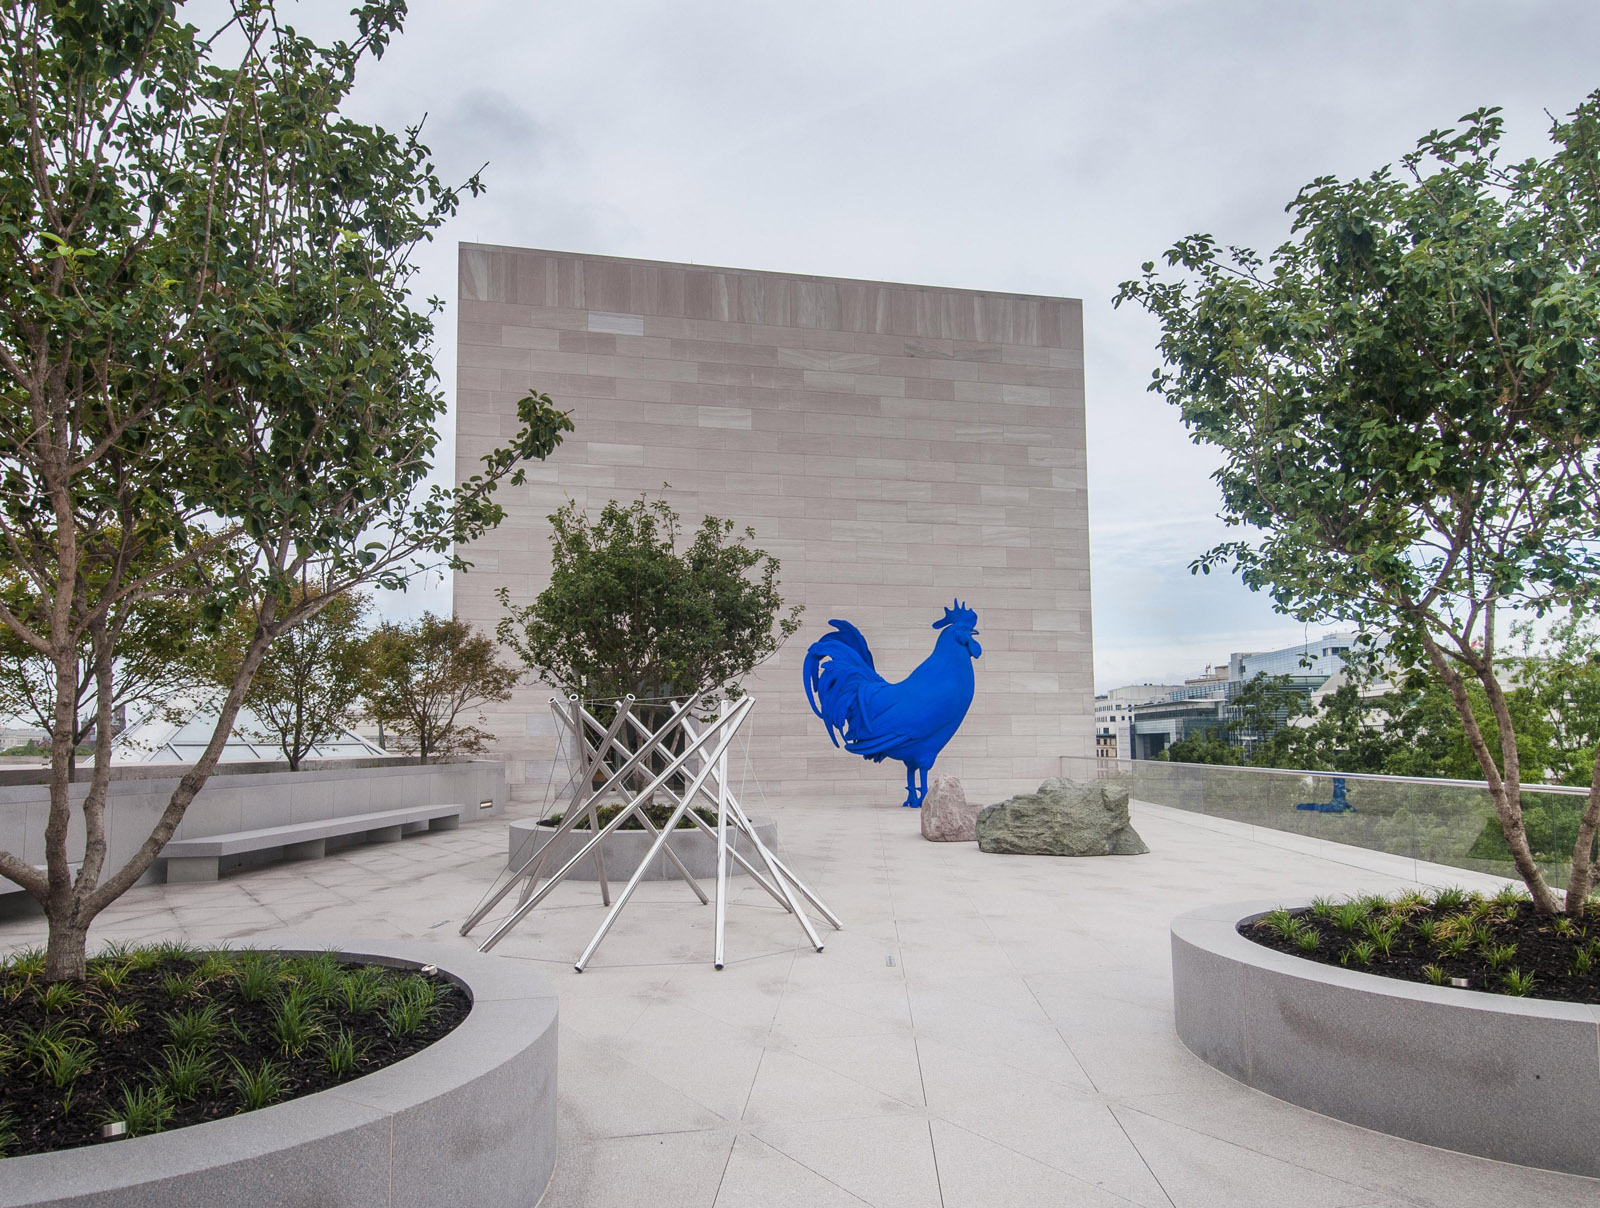 The new rooftop terrace at the East Building of the National Gallery of Art features sculptures including this blue rooster, called "Hahn/Cock" by the German artist Katharina Fritsch. (National Gallery of Art/Rob Shelley)